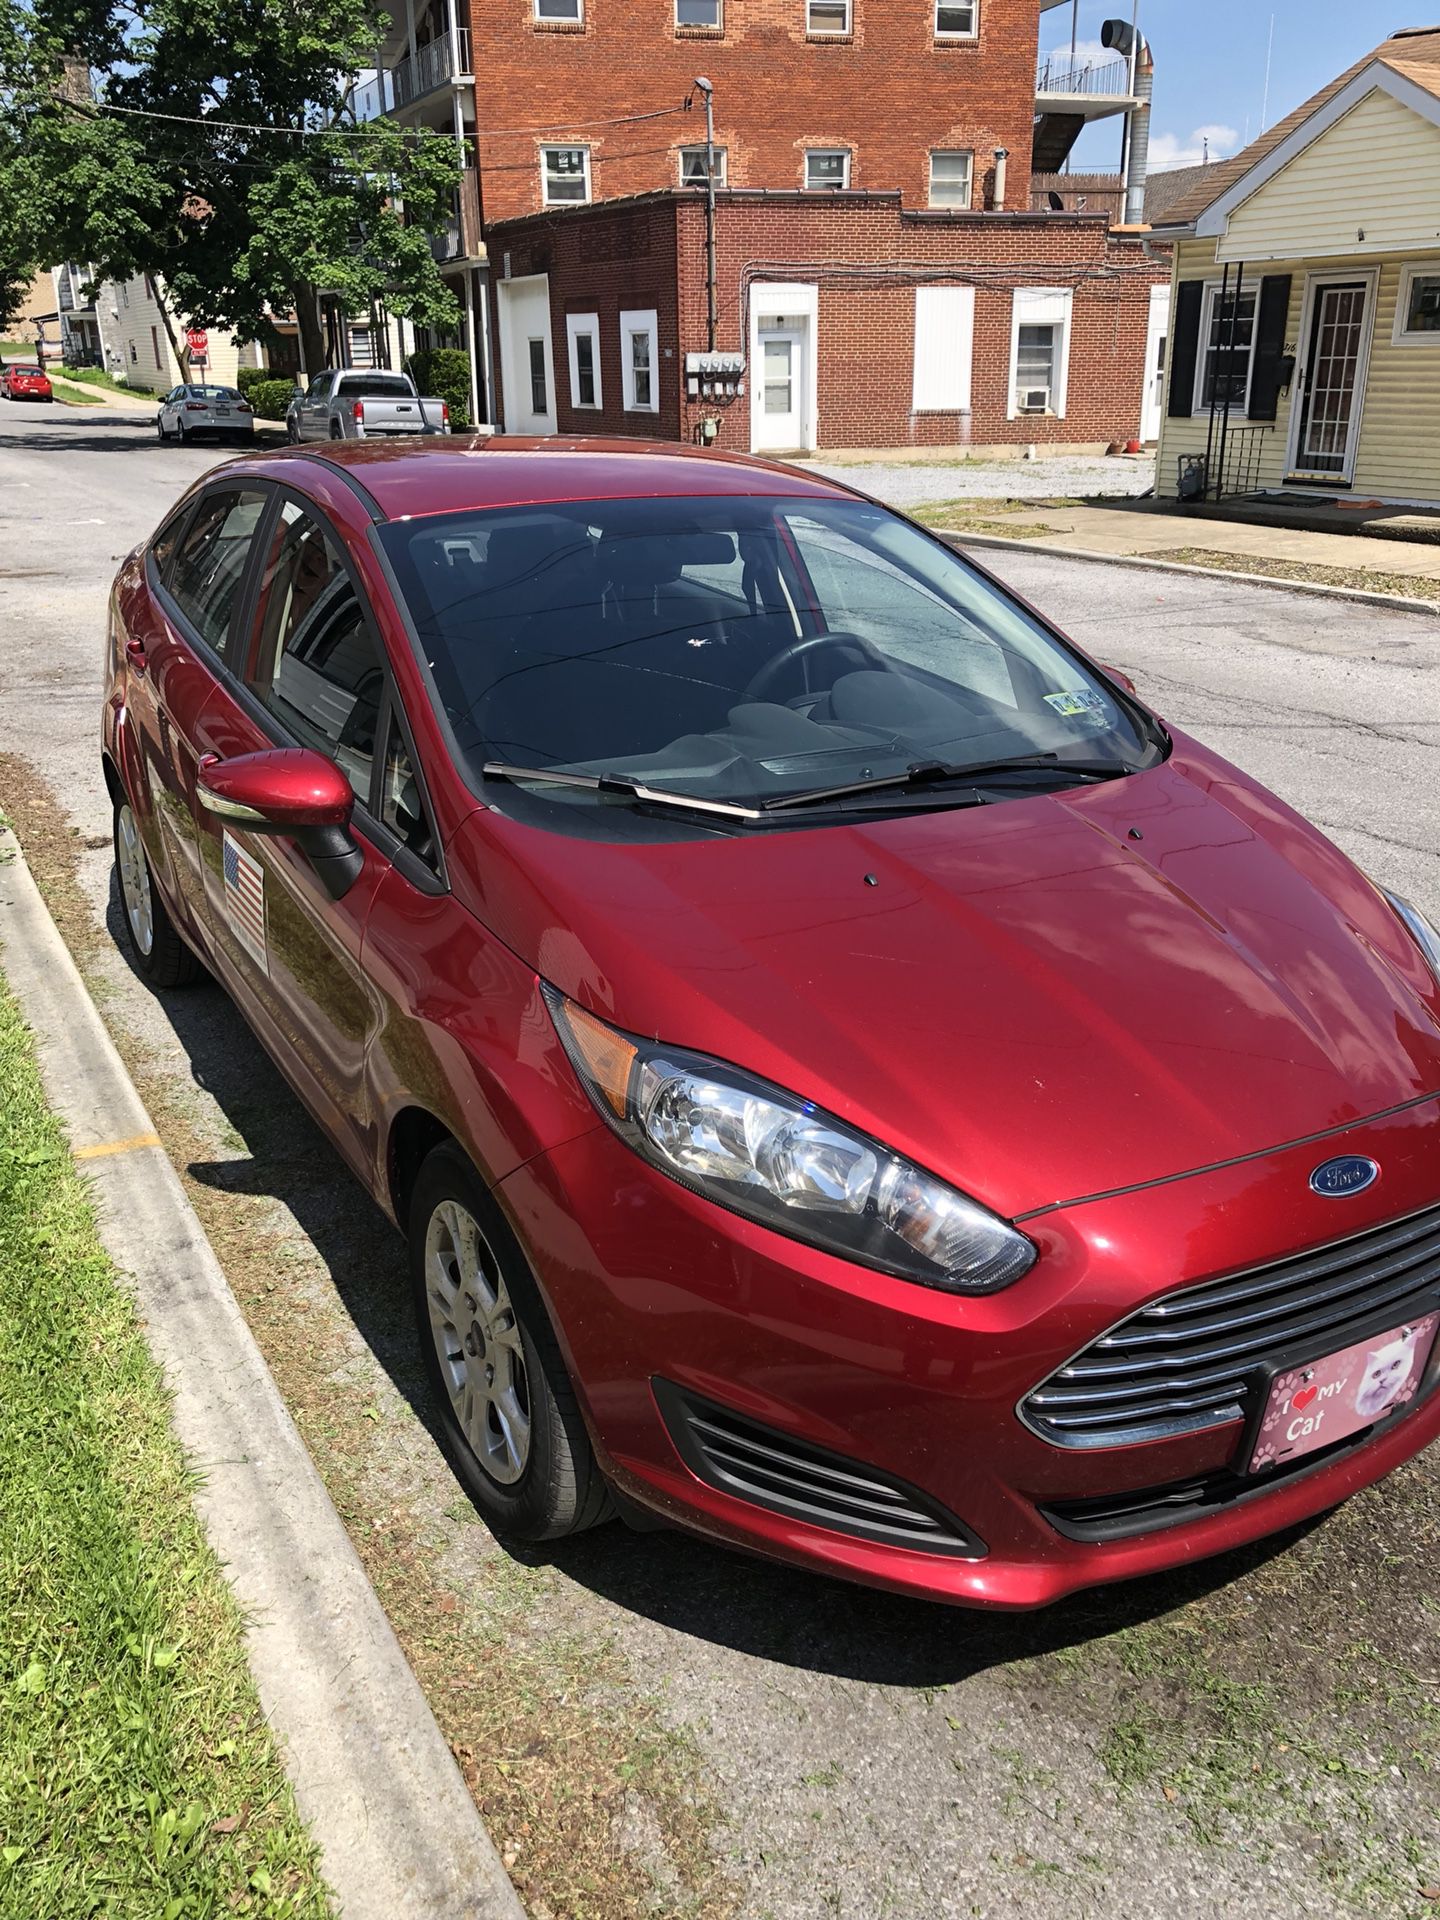 Photo It is 2016 Ford Fiesta it is a 4 door red it as about 13765 miles on it it runs will good it is in very good condition it is a very nice car for a fa